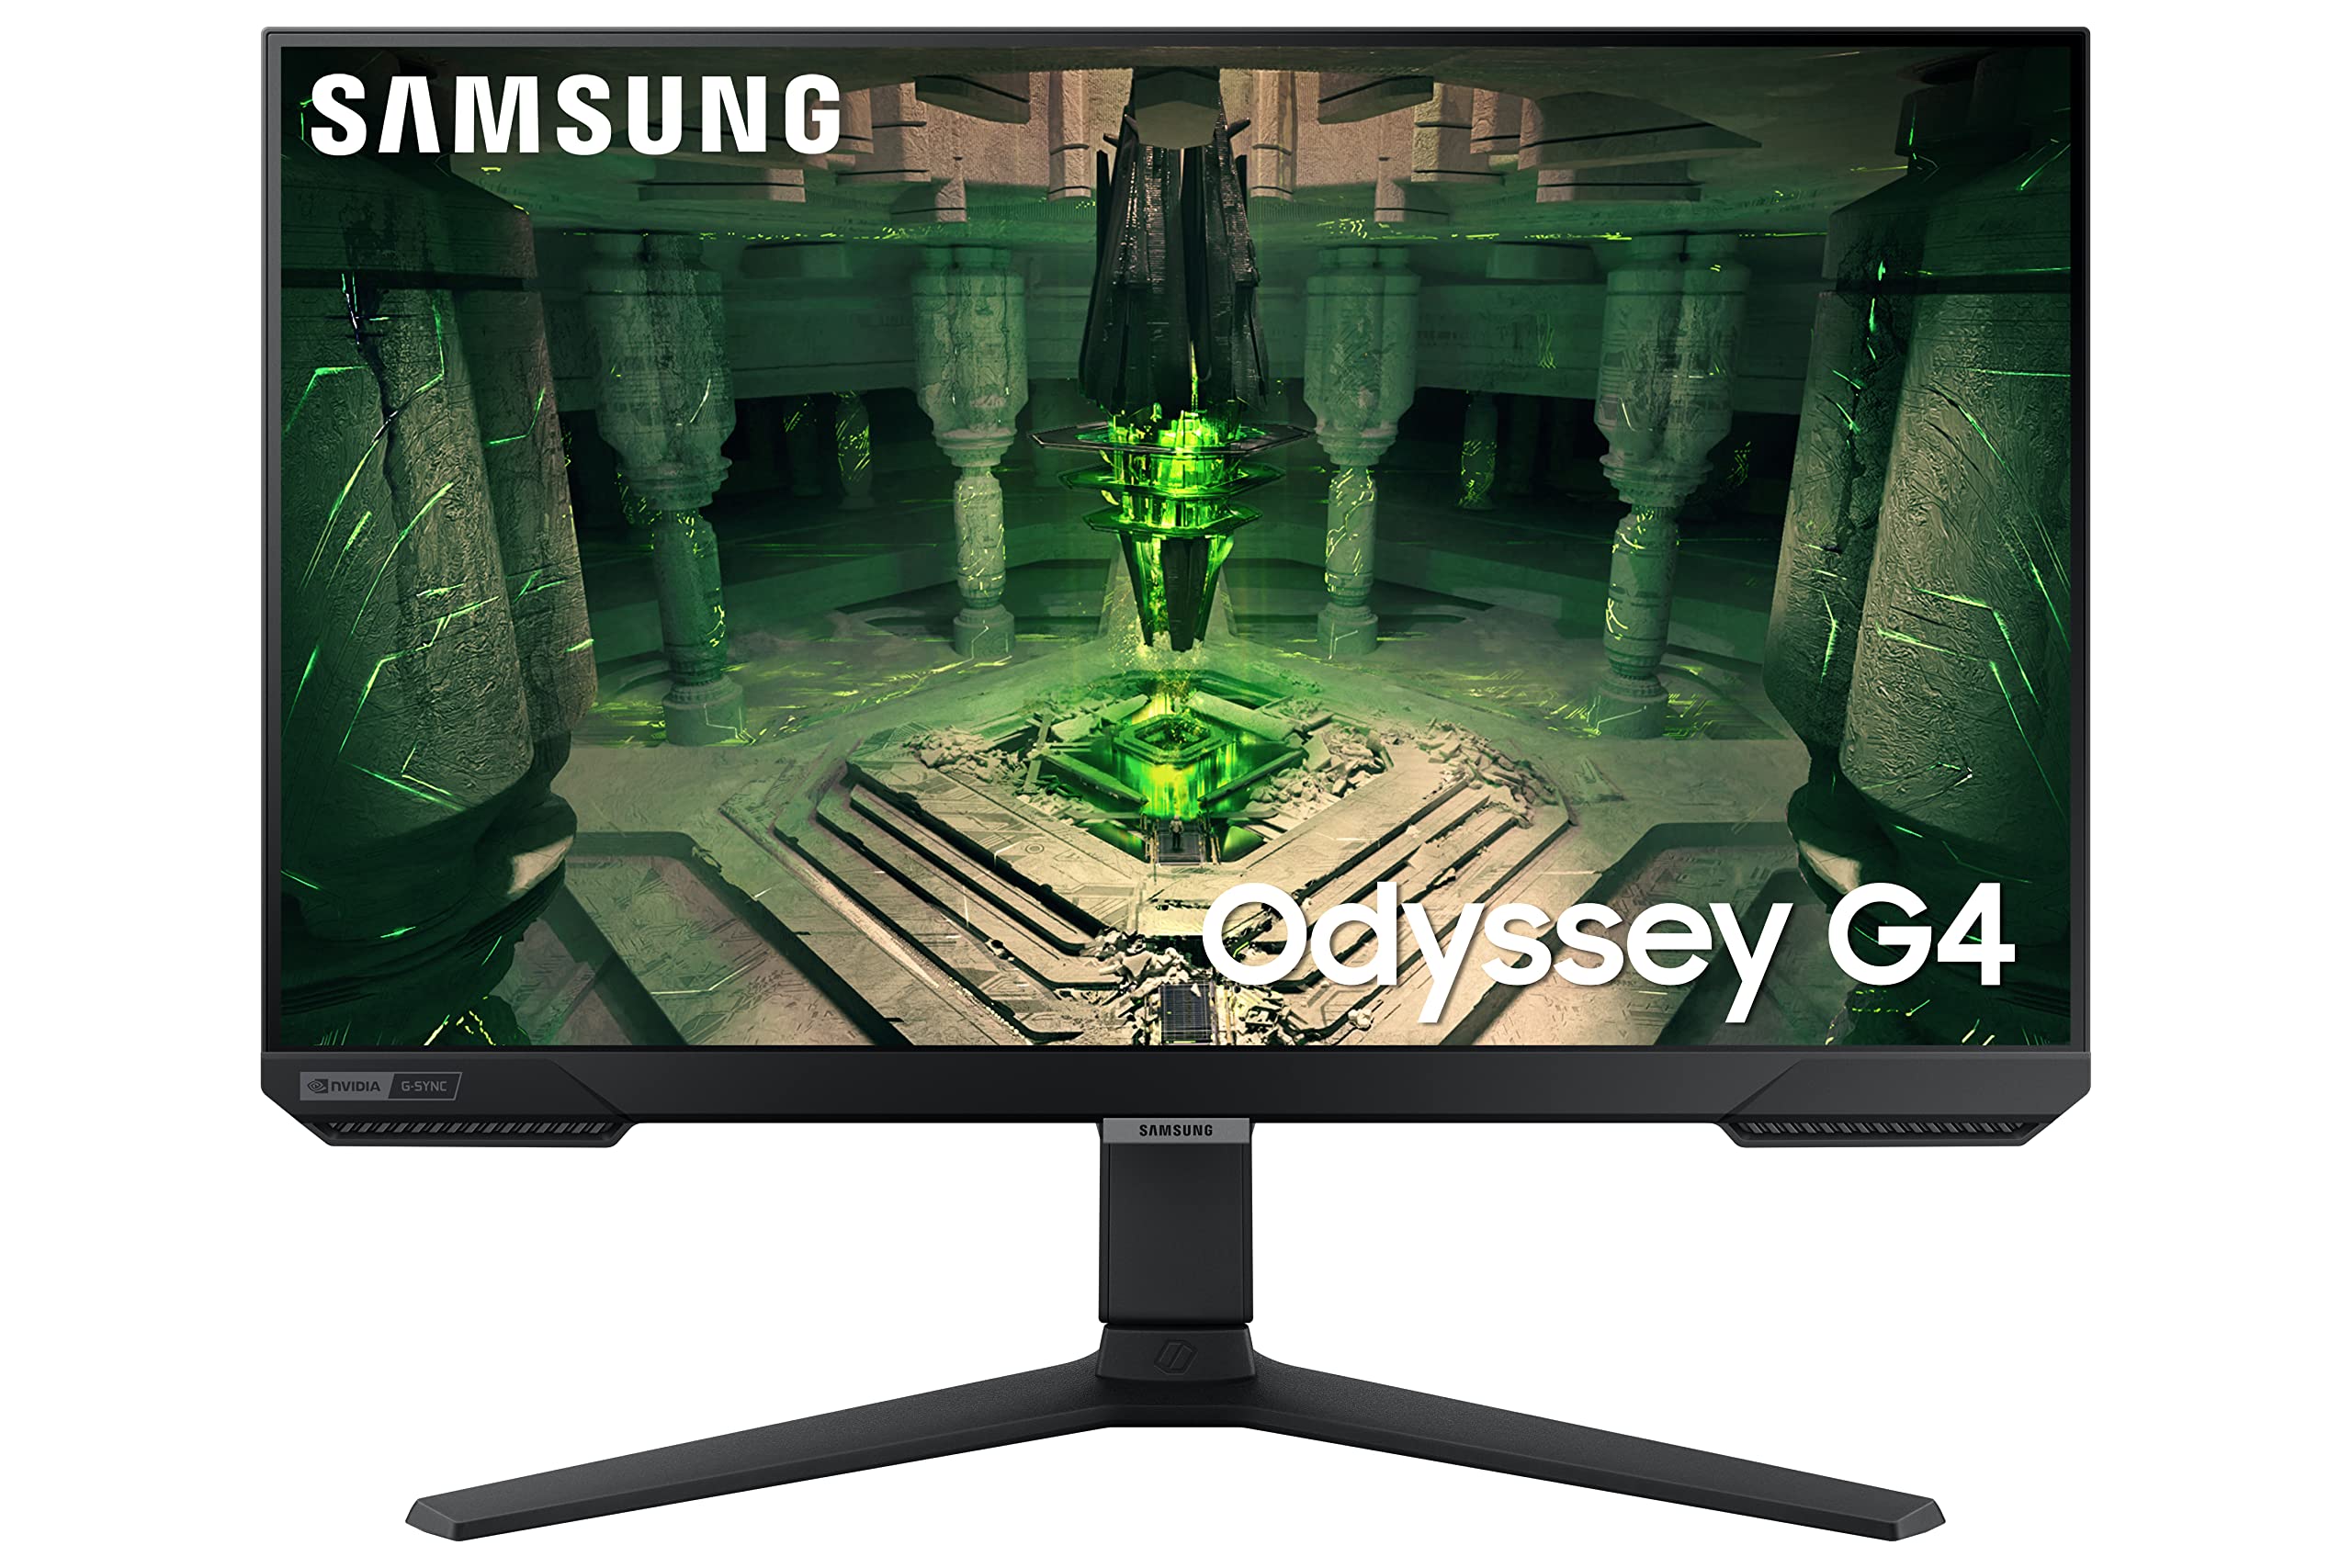 25" SAMSUNG Odyssey G4 Series FHD Gaming Monitor, IPS, 240Hz, 1ms, G-Sync Compatible & Ultrawide Game View $200 + Free Shipping